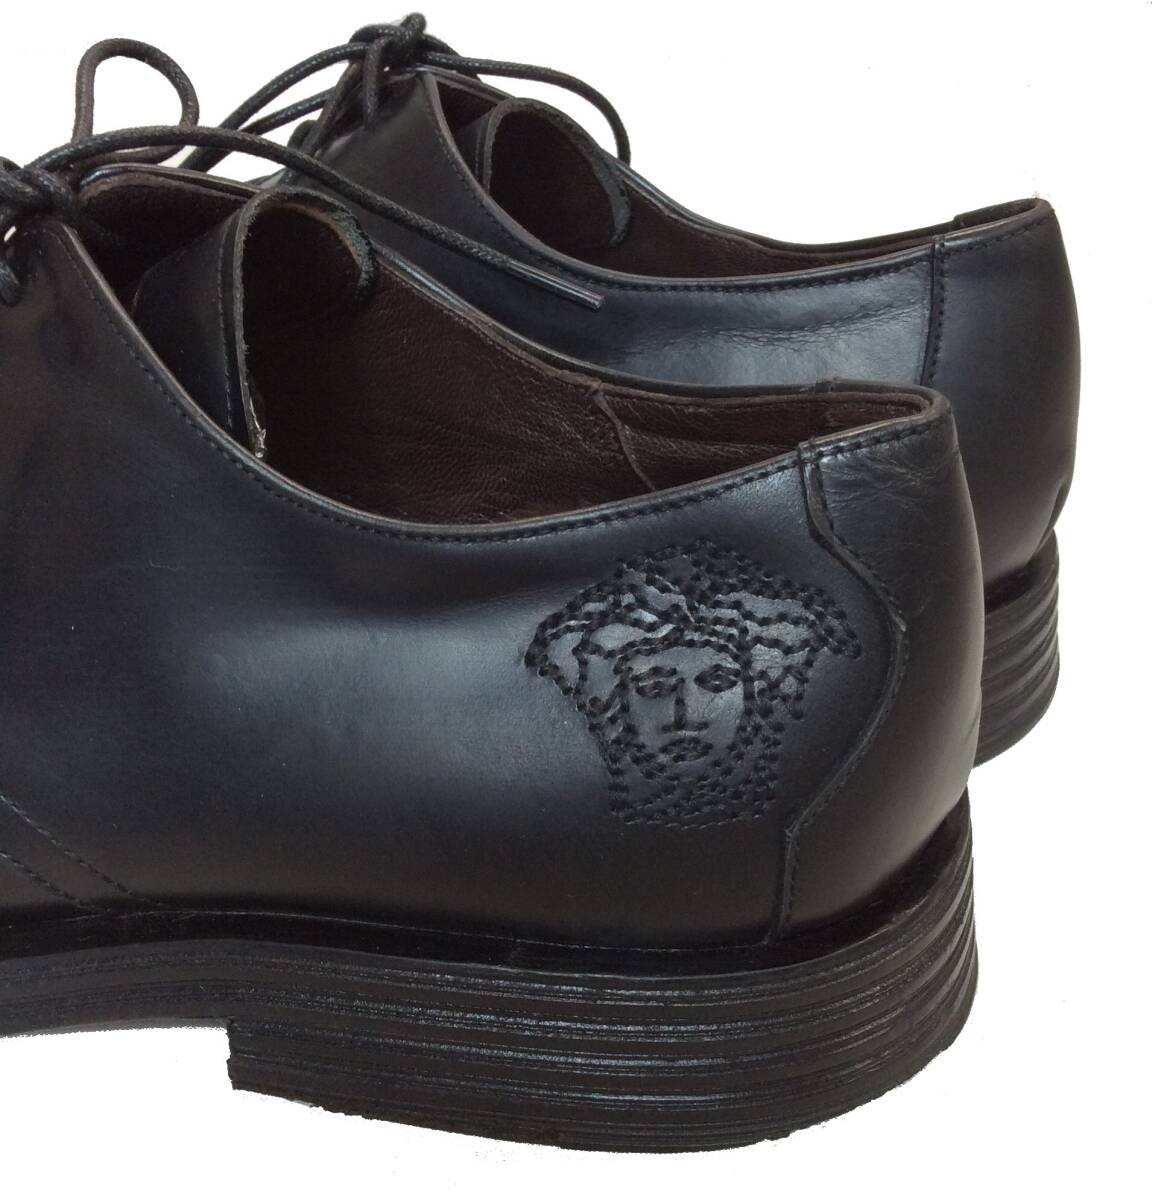 GIANNI VERSACE Gianni Versace mete.-sa embroidery dress shoes leather shoes black black ITALY made leather men's 6 (ma)